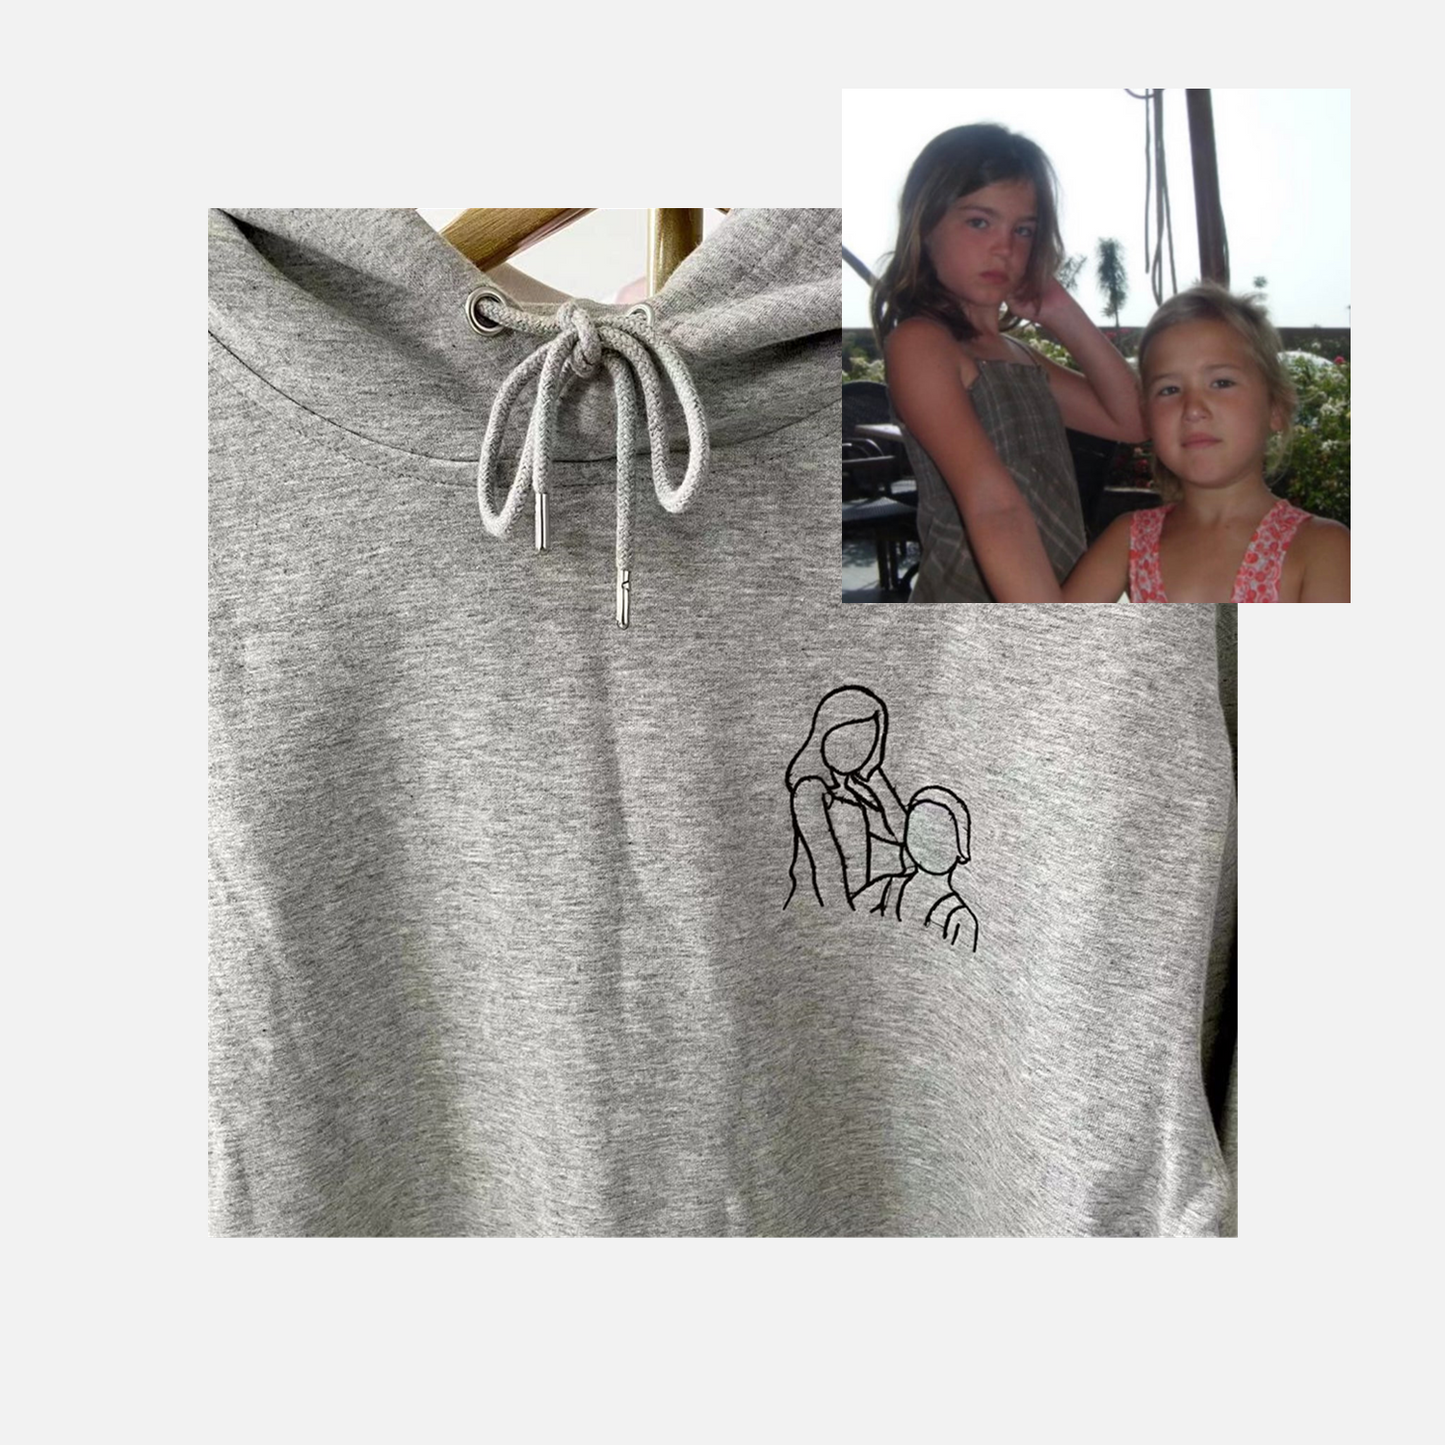 Personalized Photo Line Drawing Embroidered Sweatshirt